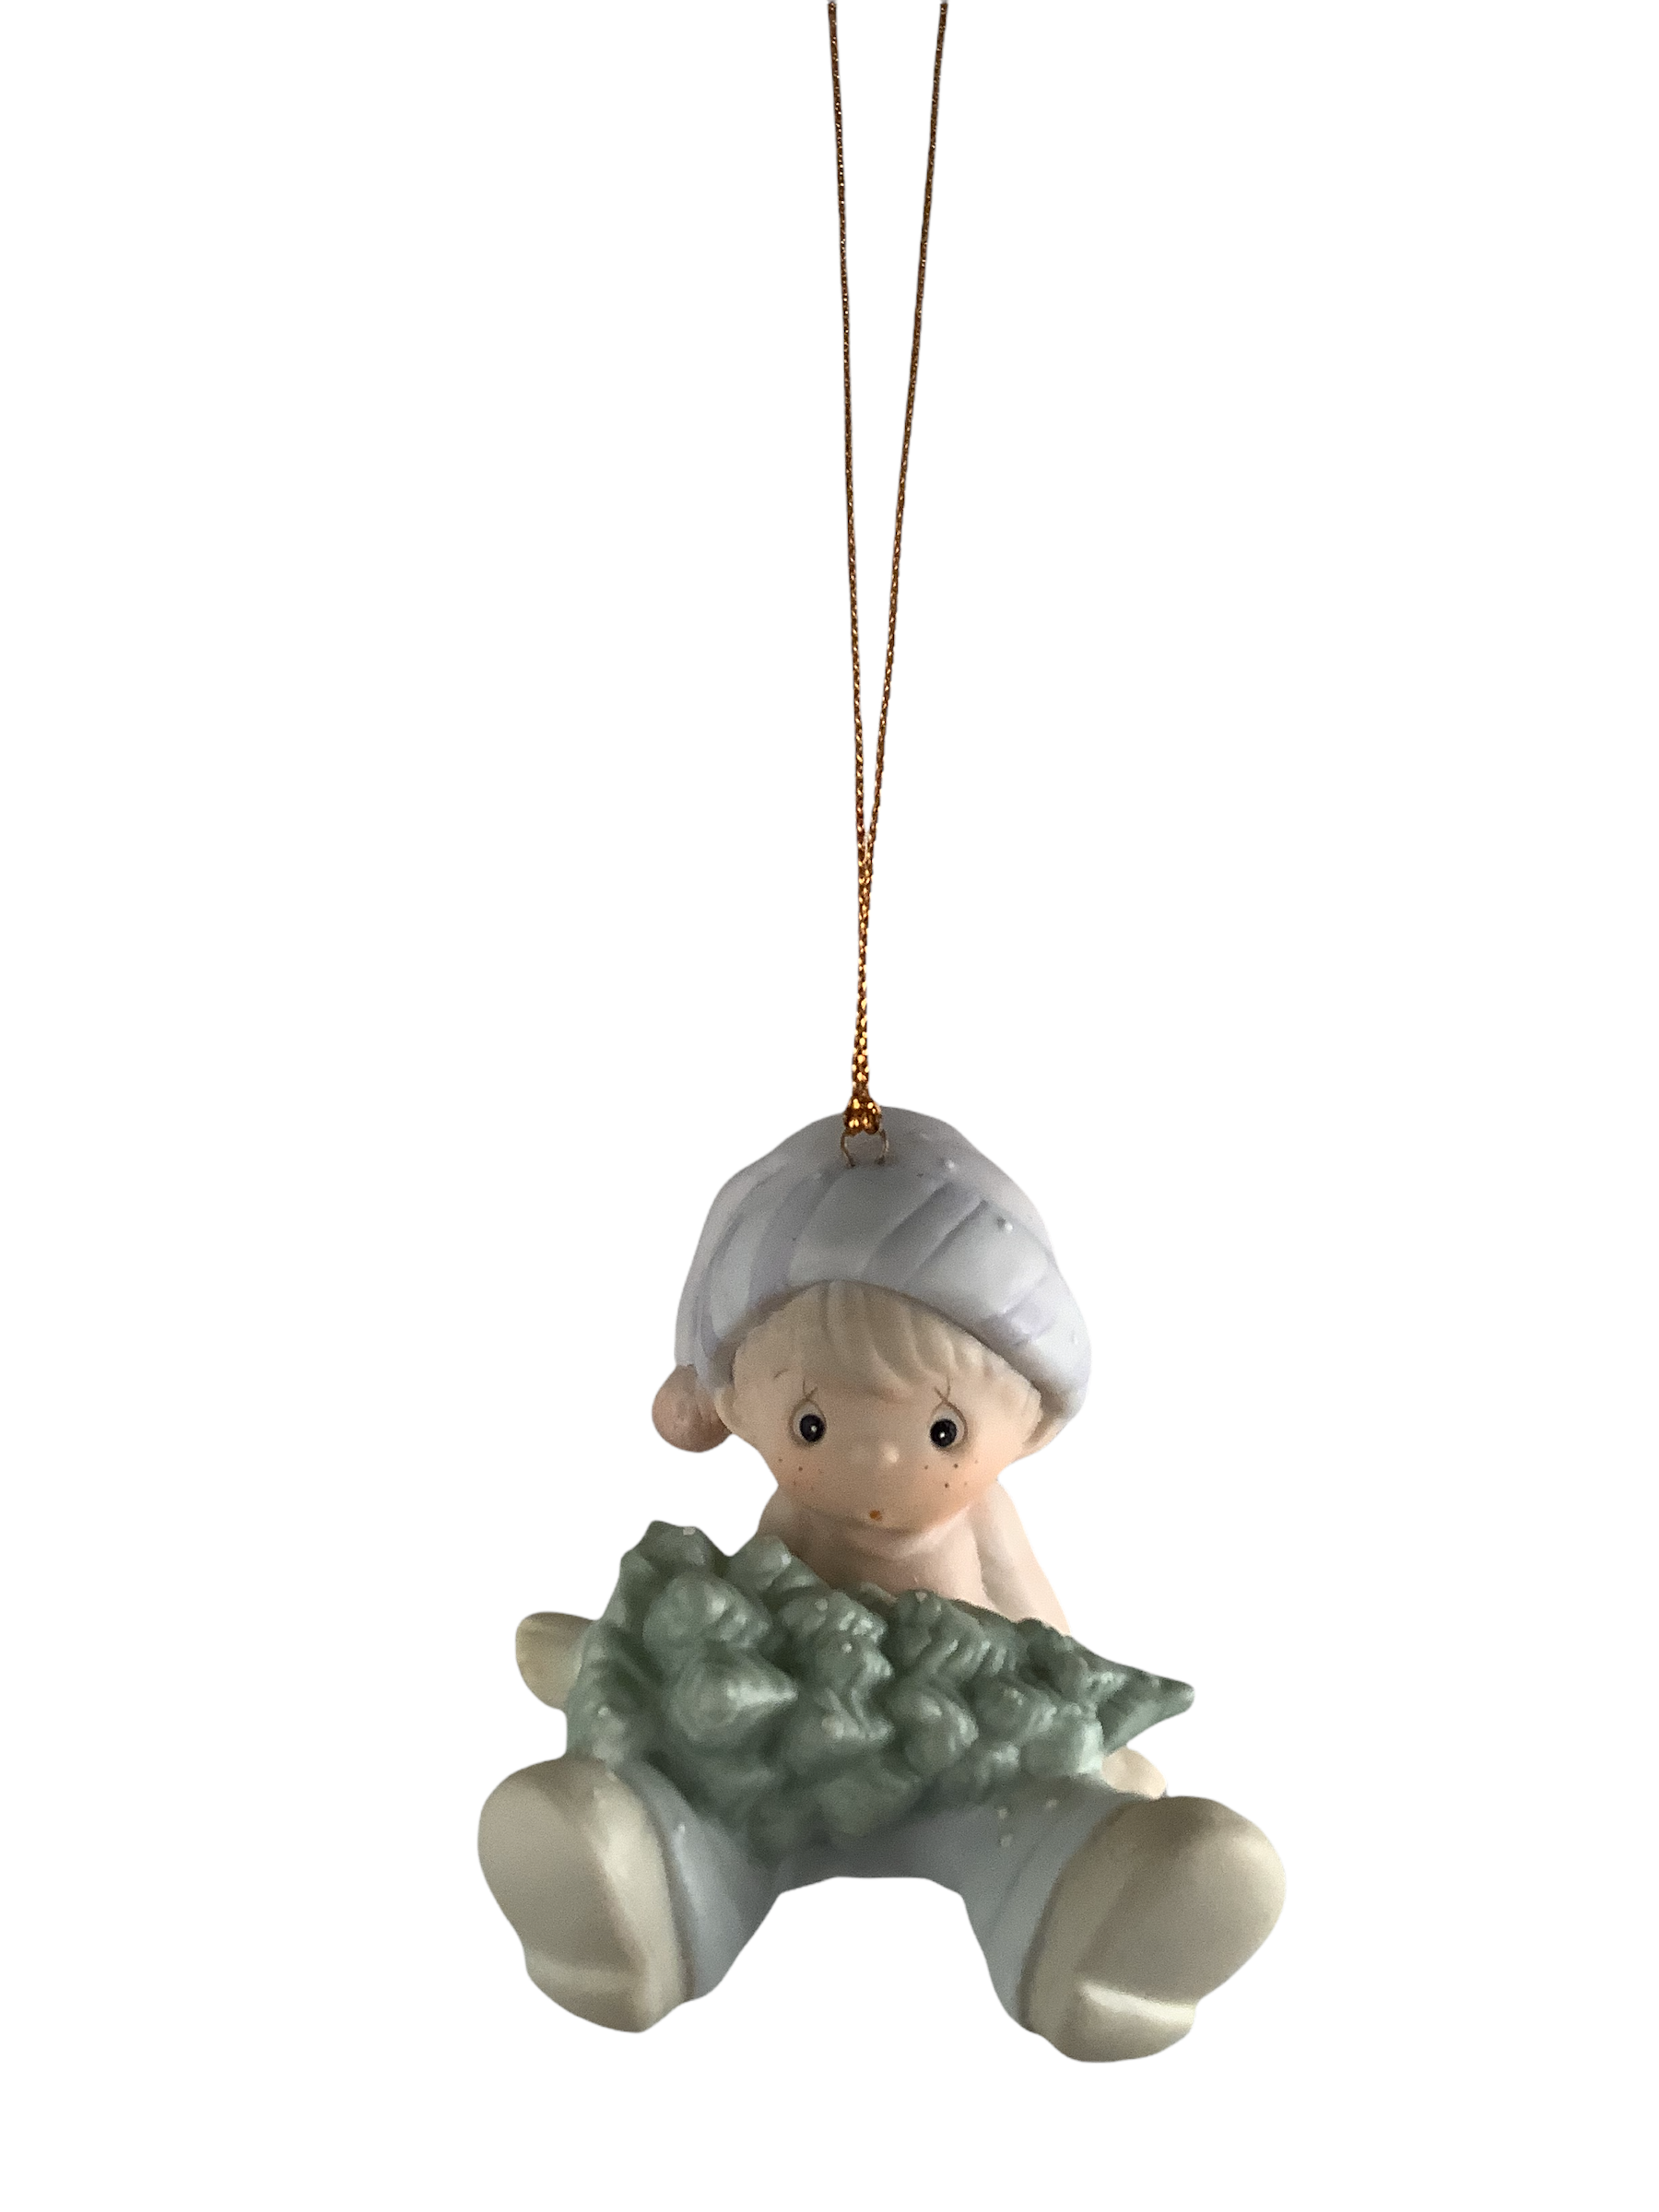 Don't Let The Holidays Get You Down - Precious Moment Ornament